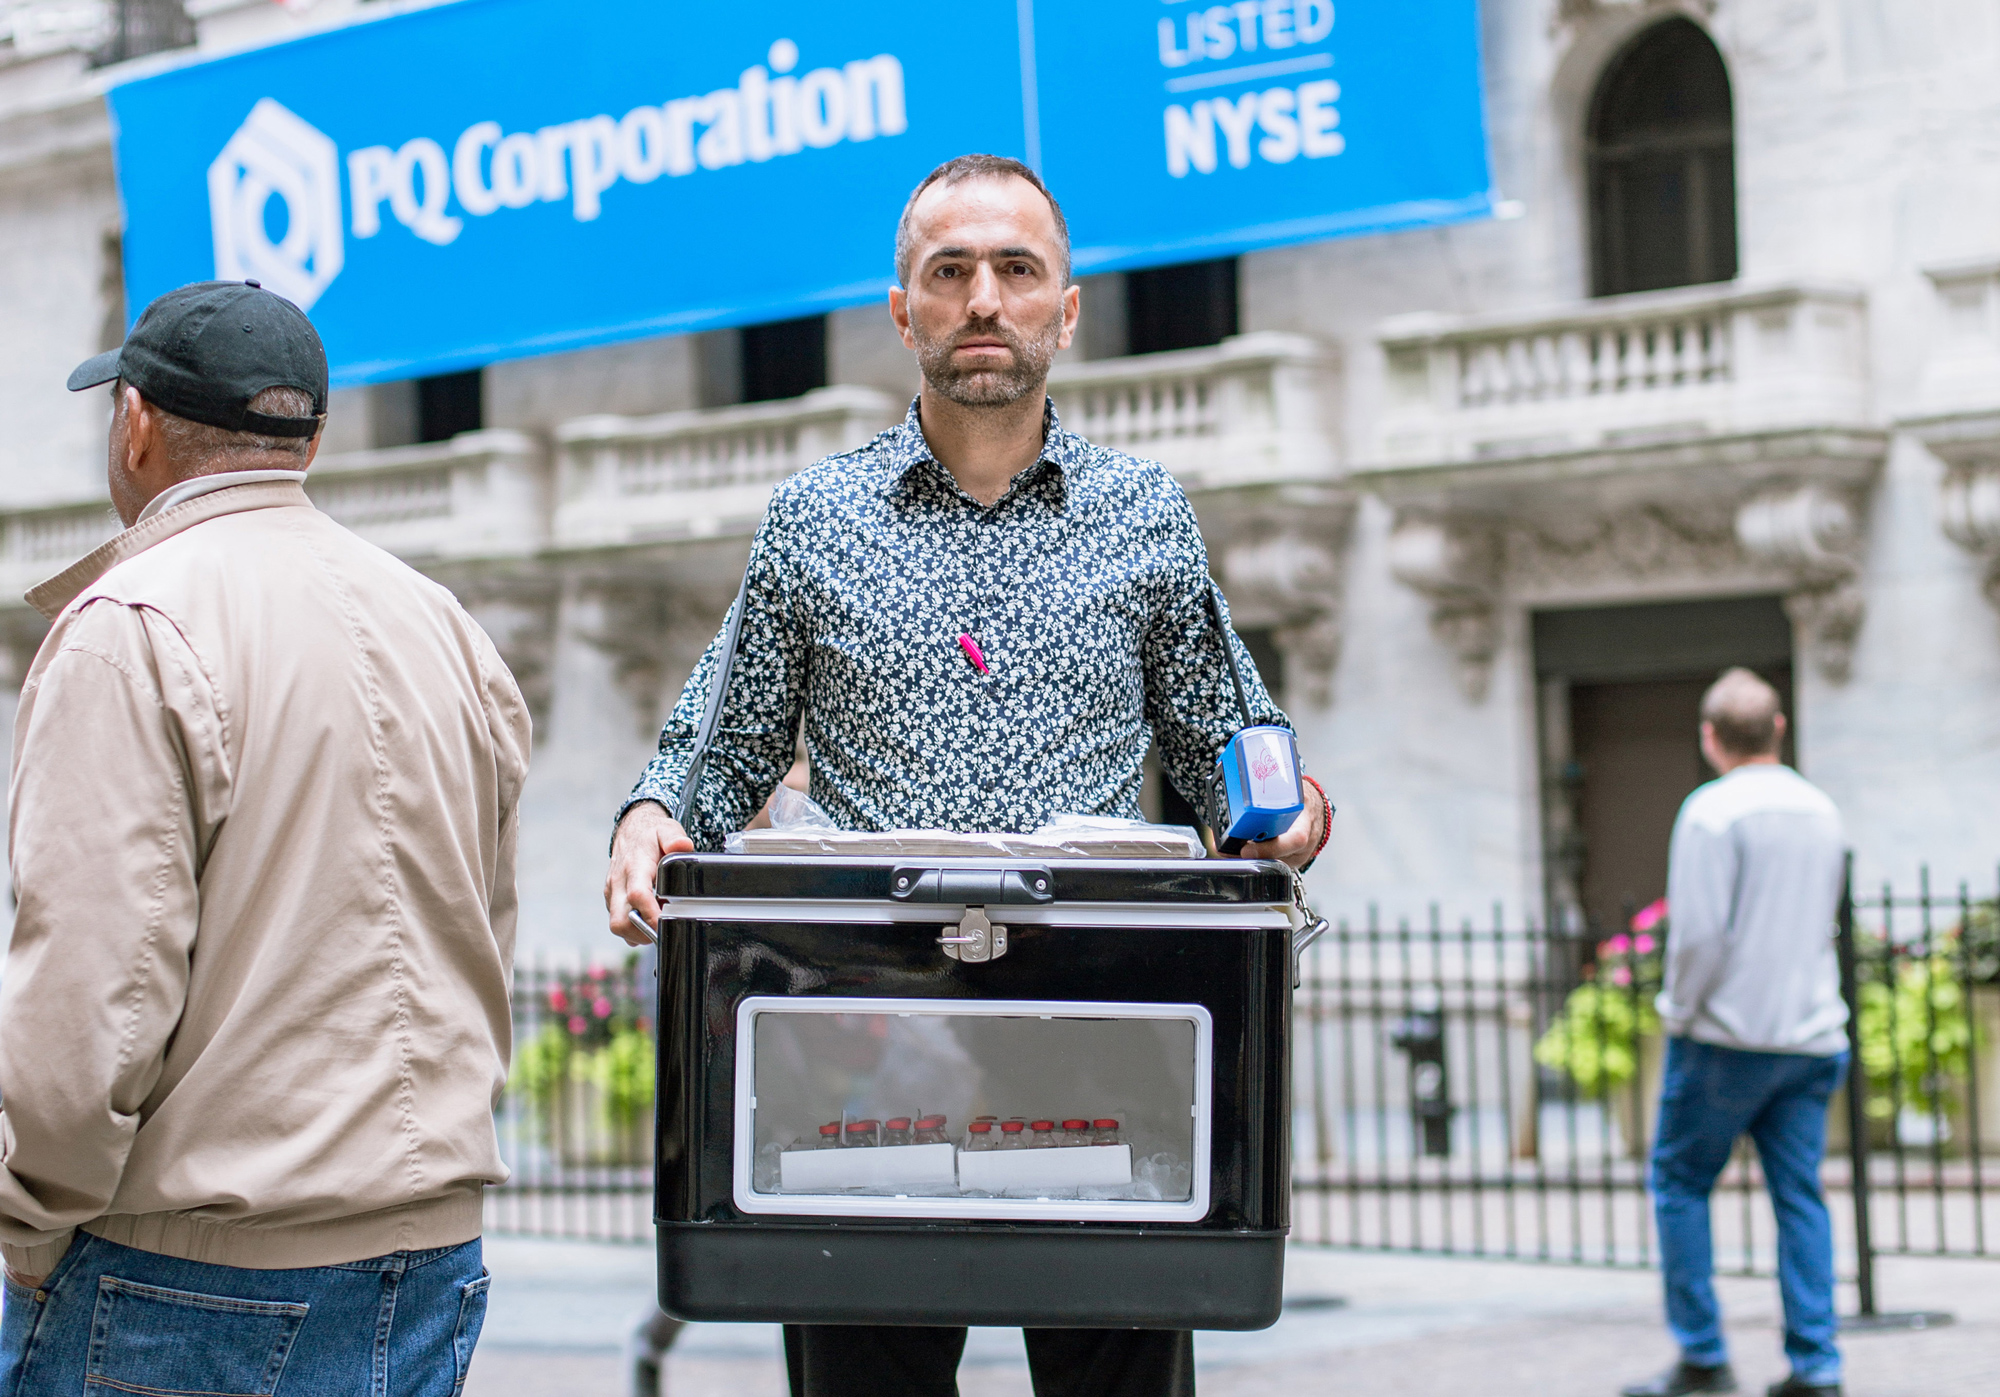 Image of Khaled Jarrar’s public performance on Wall Street. A man holds a black metal cooler. Glass viles can be seen through an opening in the front.